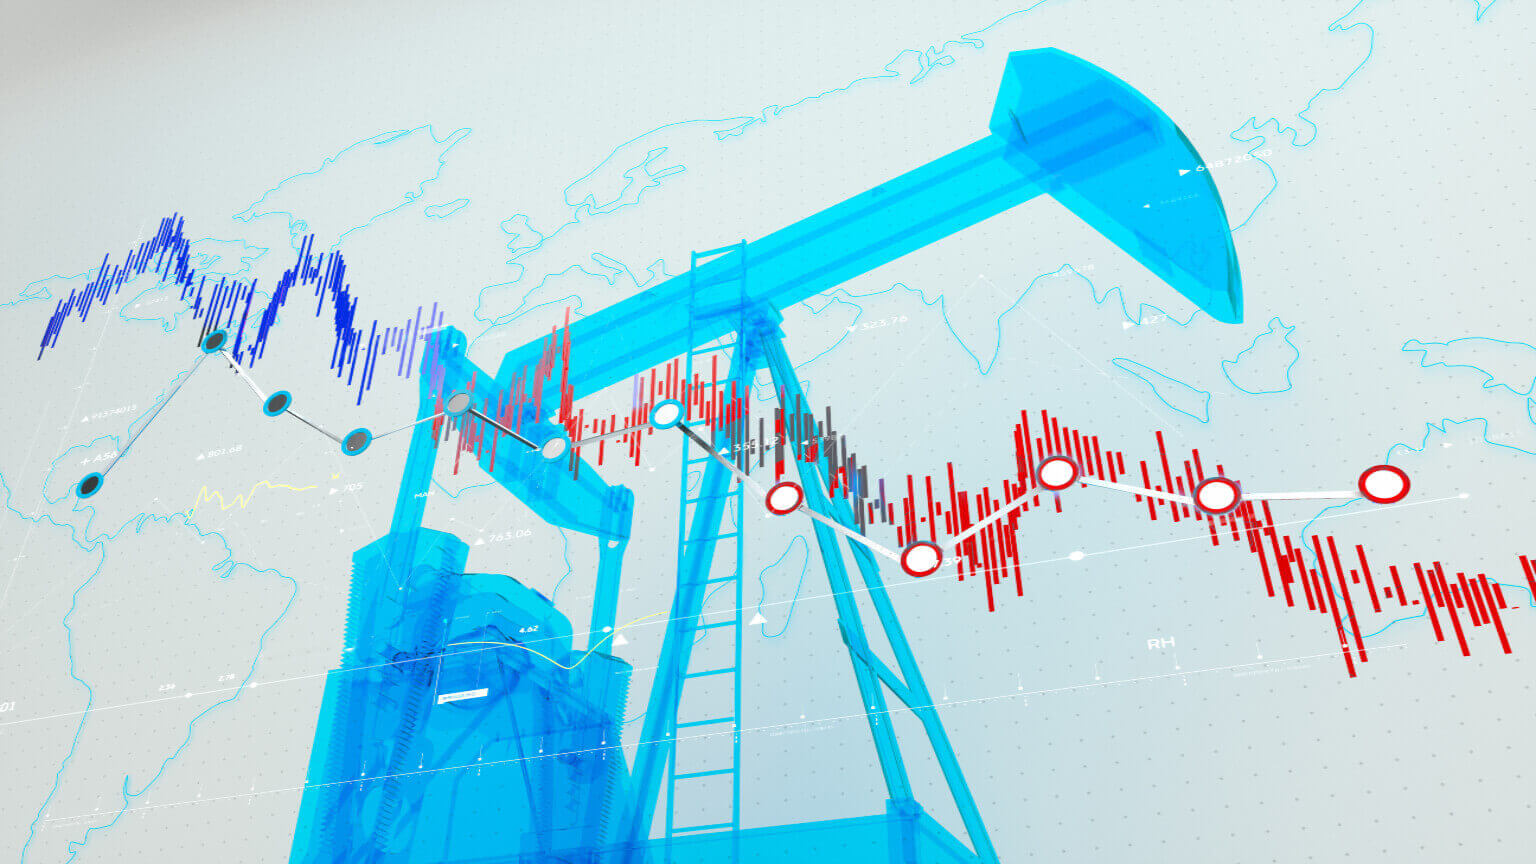 Oil options trading: fixed-risk trading in volatile markets